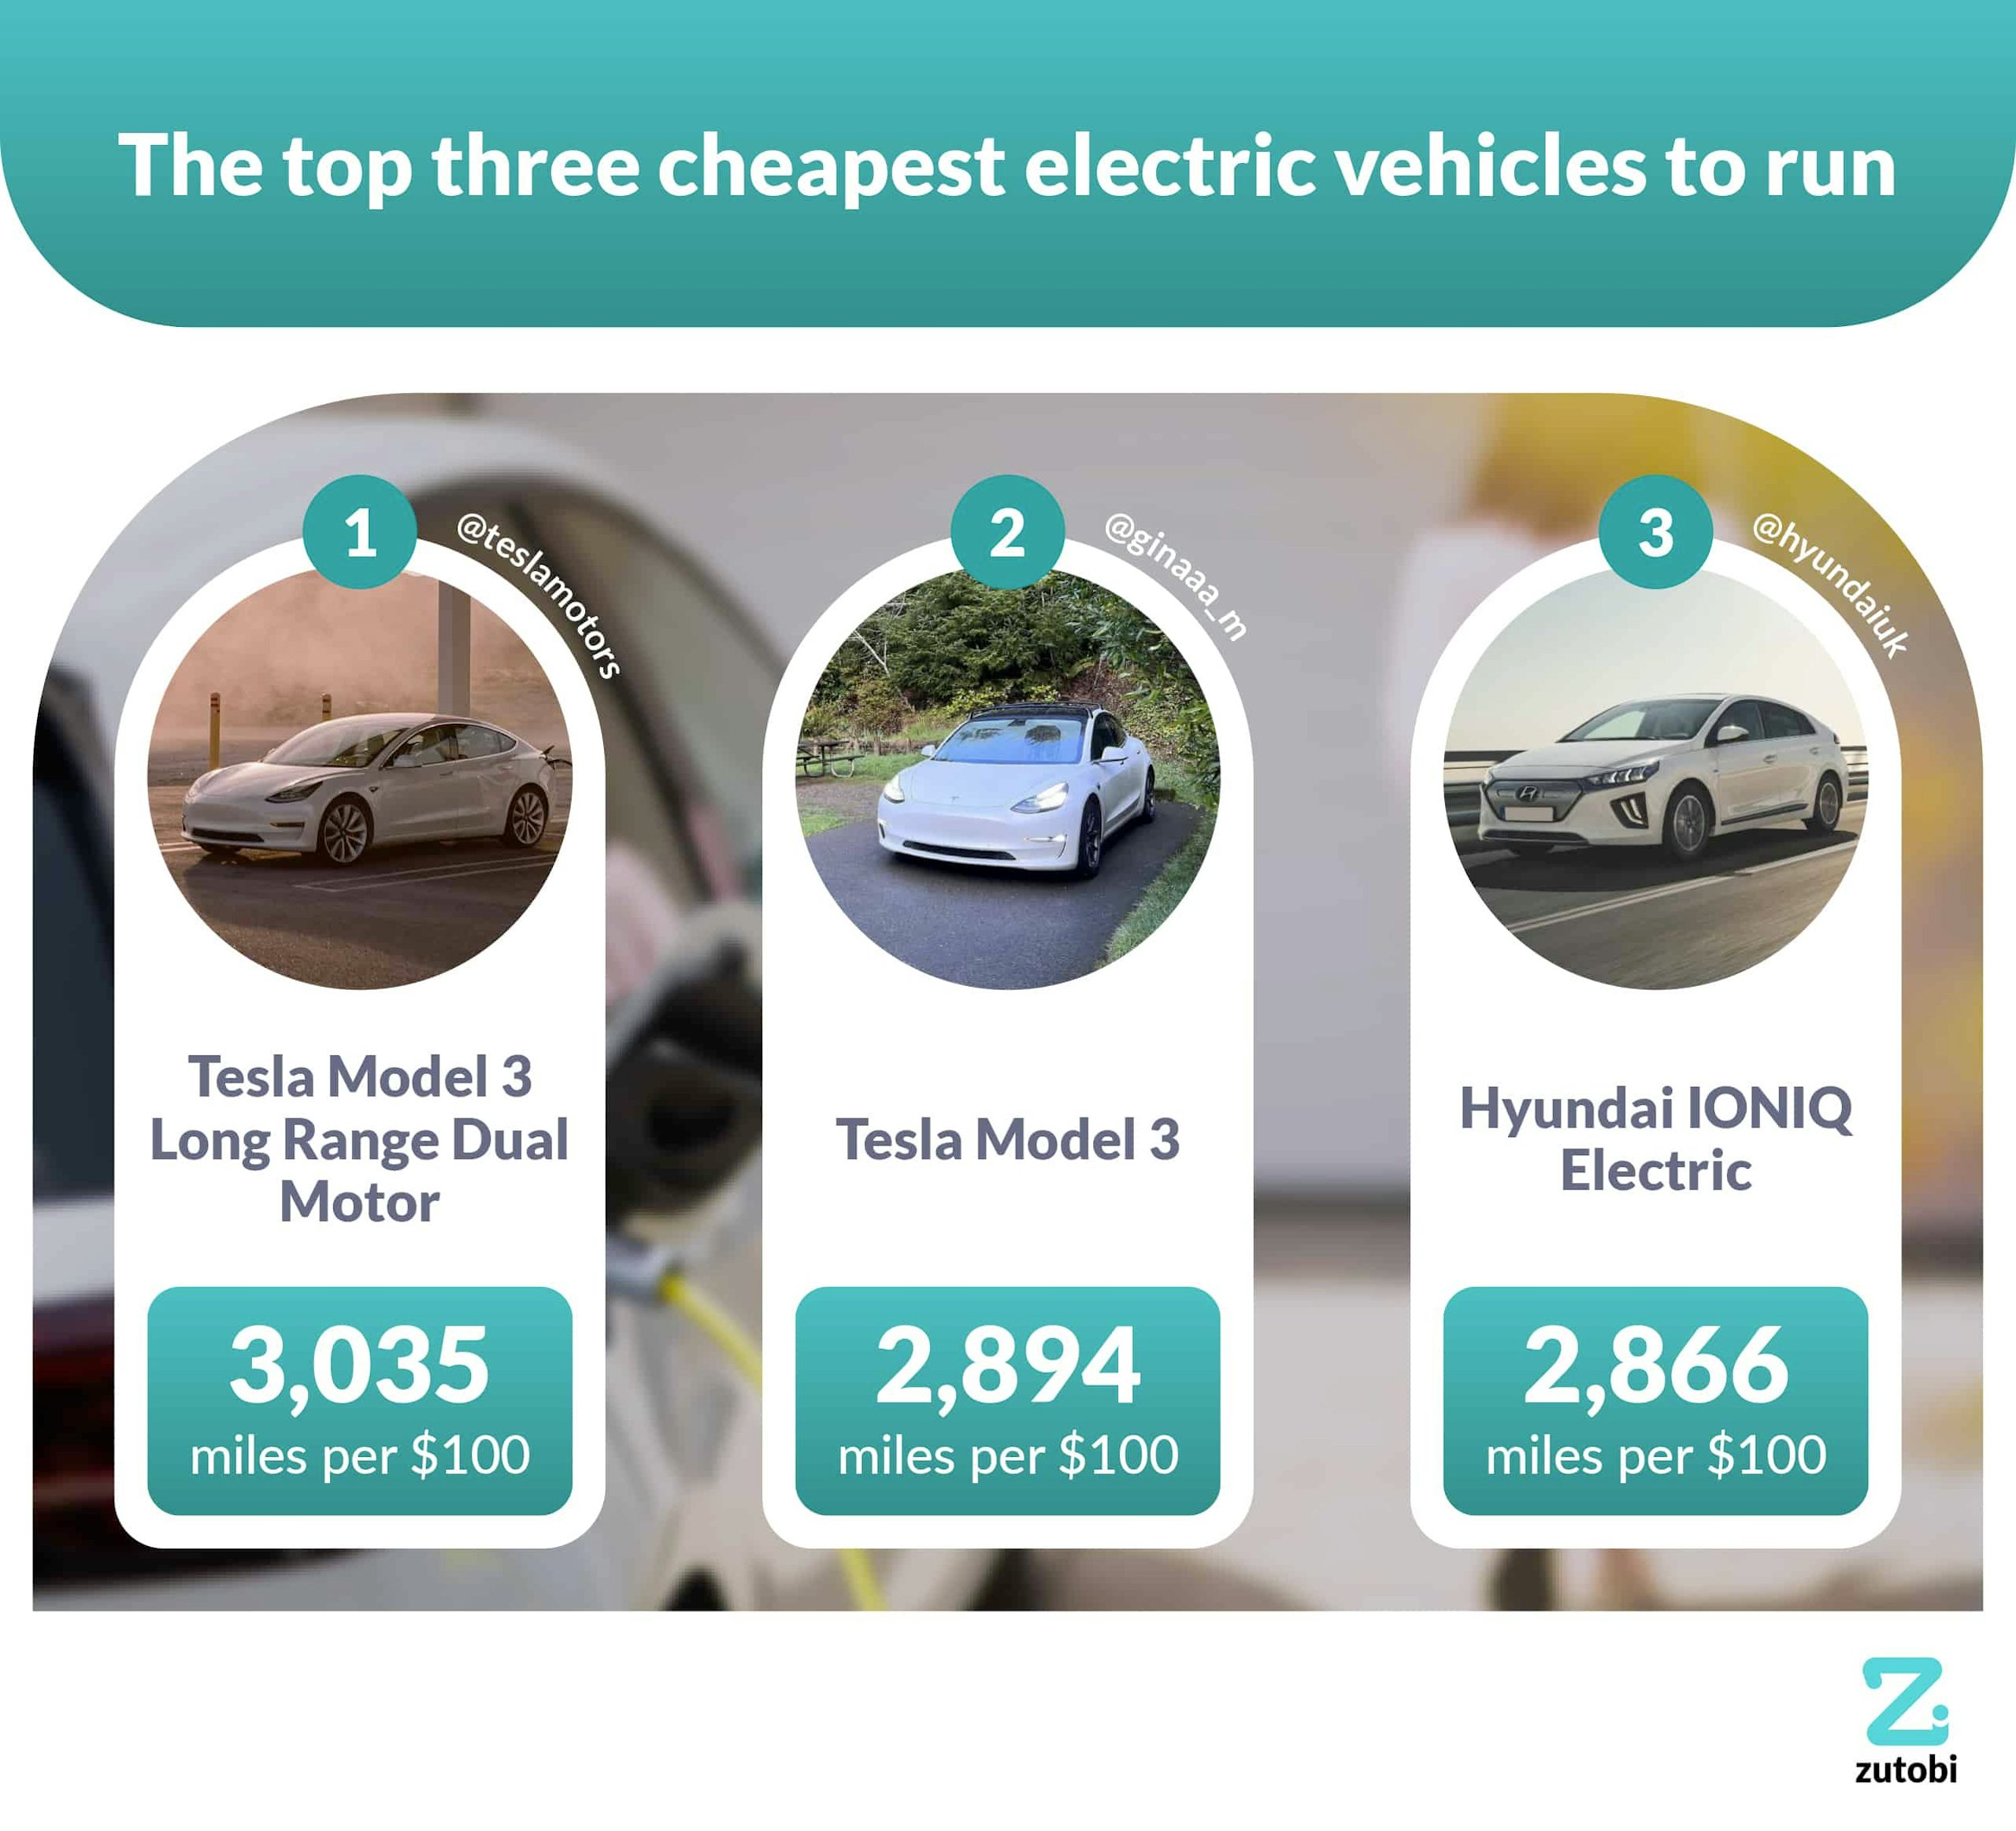 The most affordable electric vehicles in 2022 and 2023